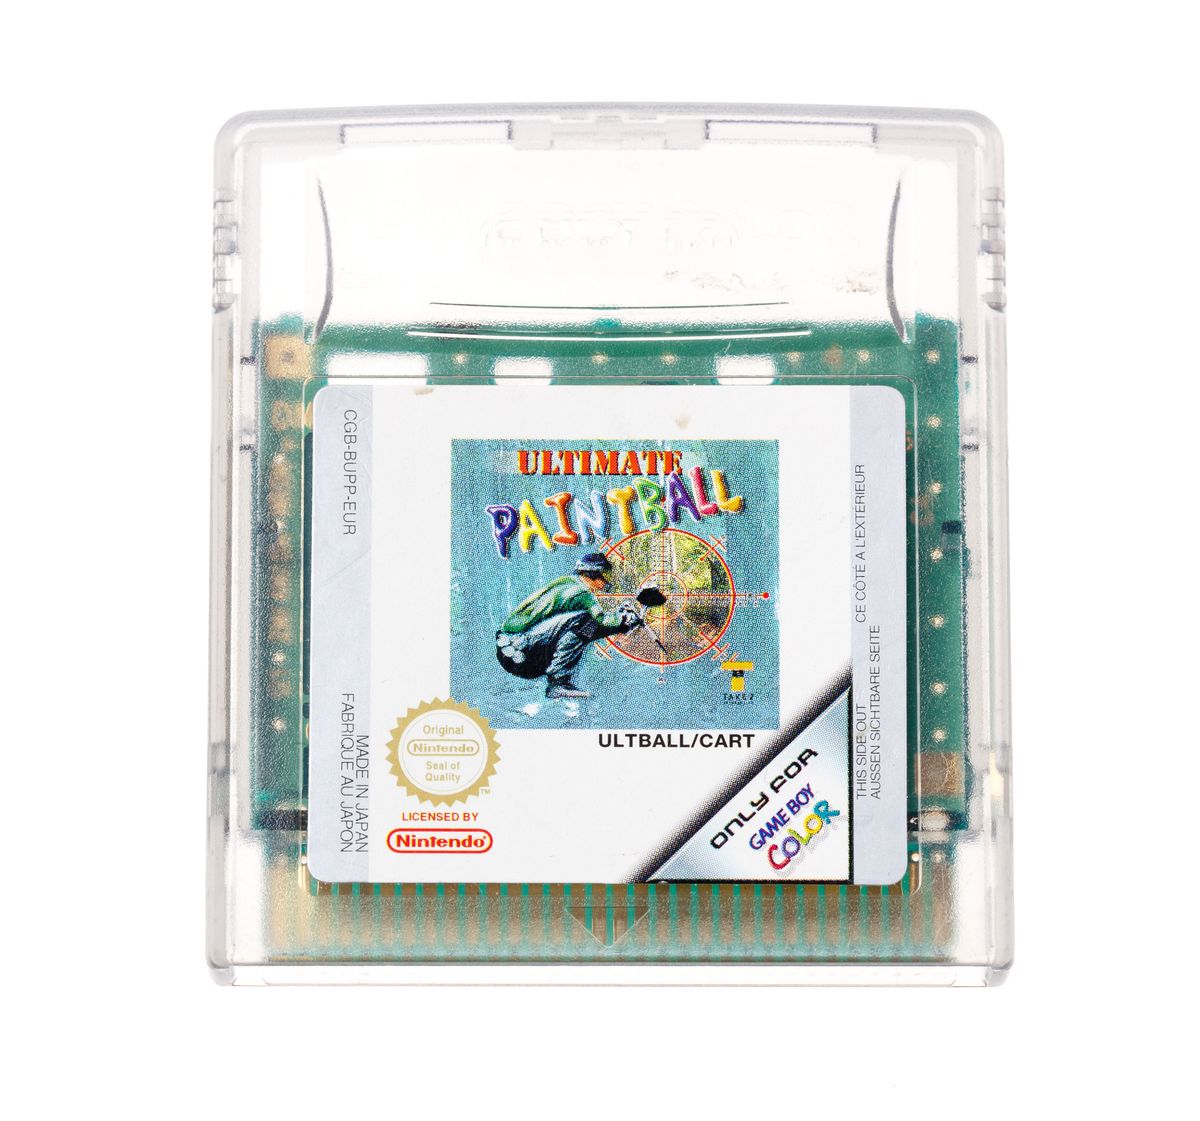 Ultimate Paintball | Gameboy Color Games | RetroNintendoKopen.nl